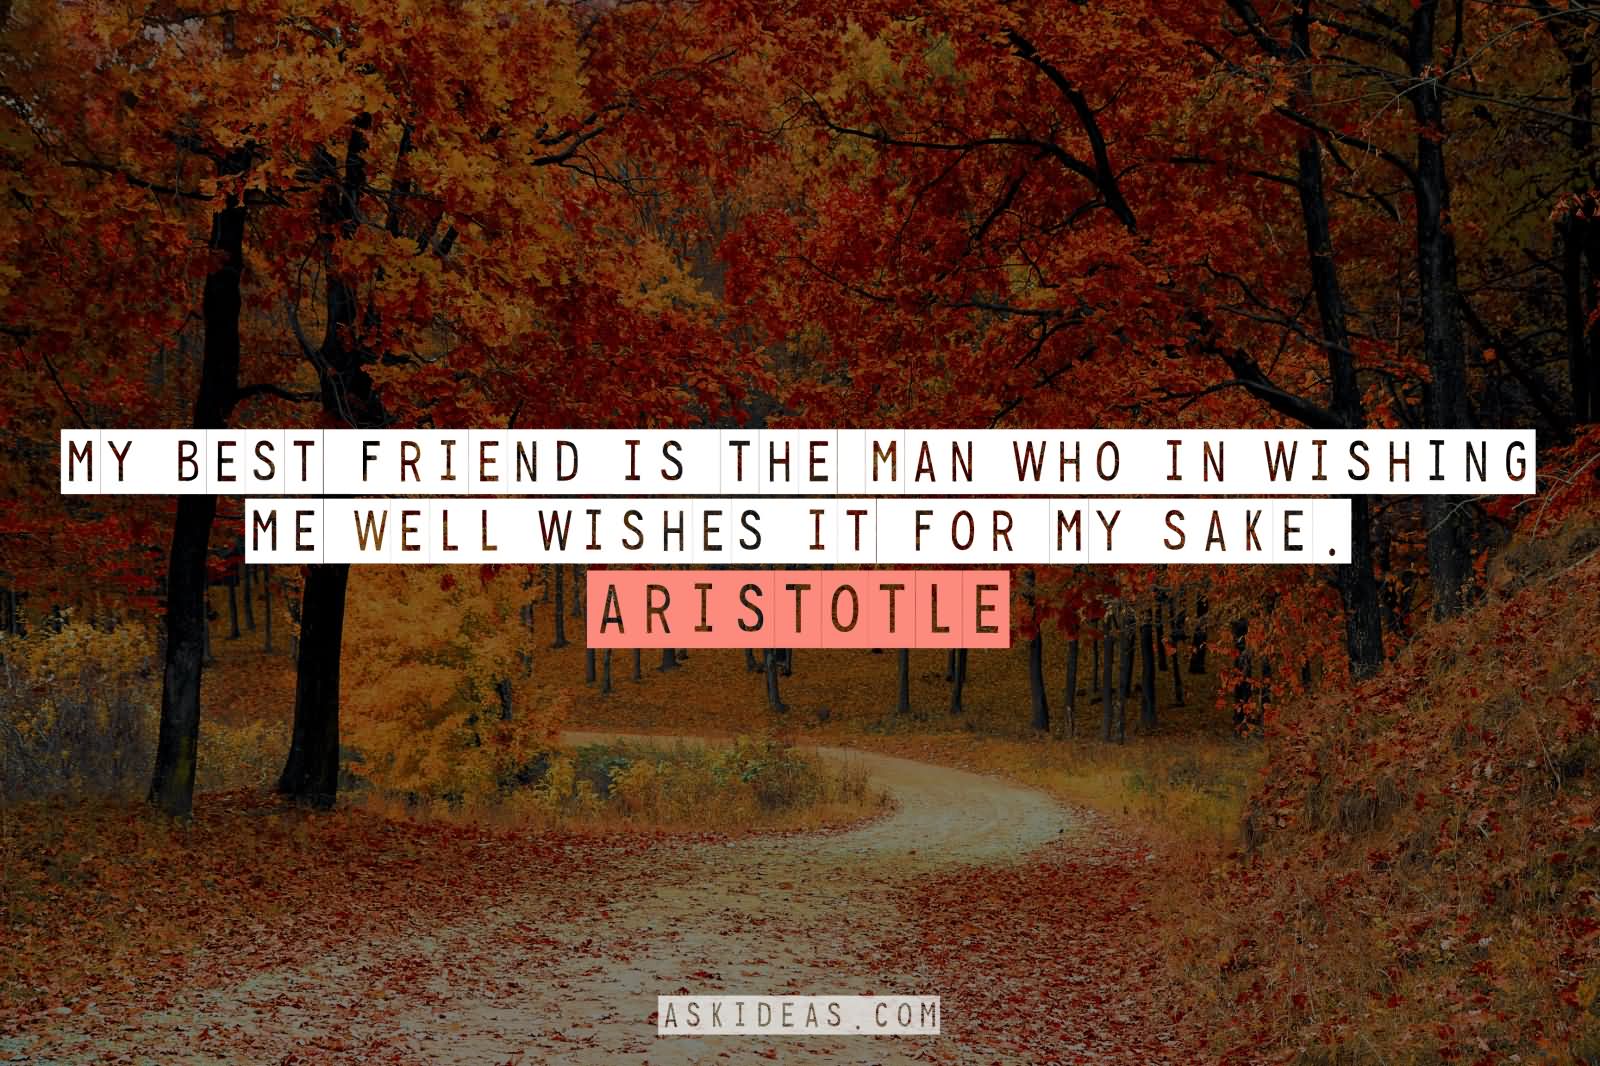 My best friend is the man who in wishing me well wishes it for my sake. Aristotle